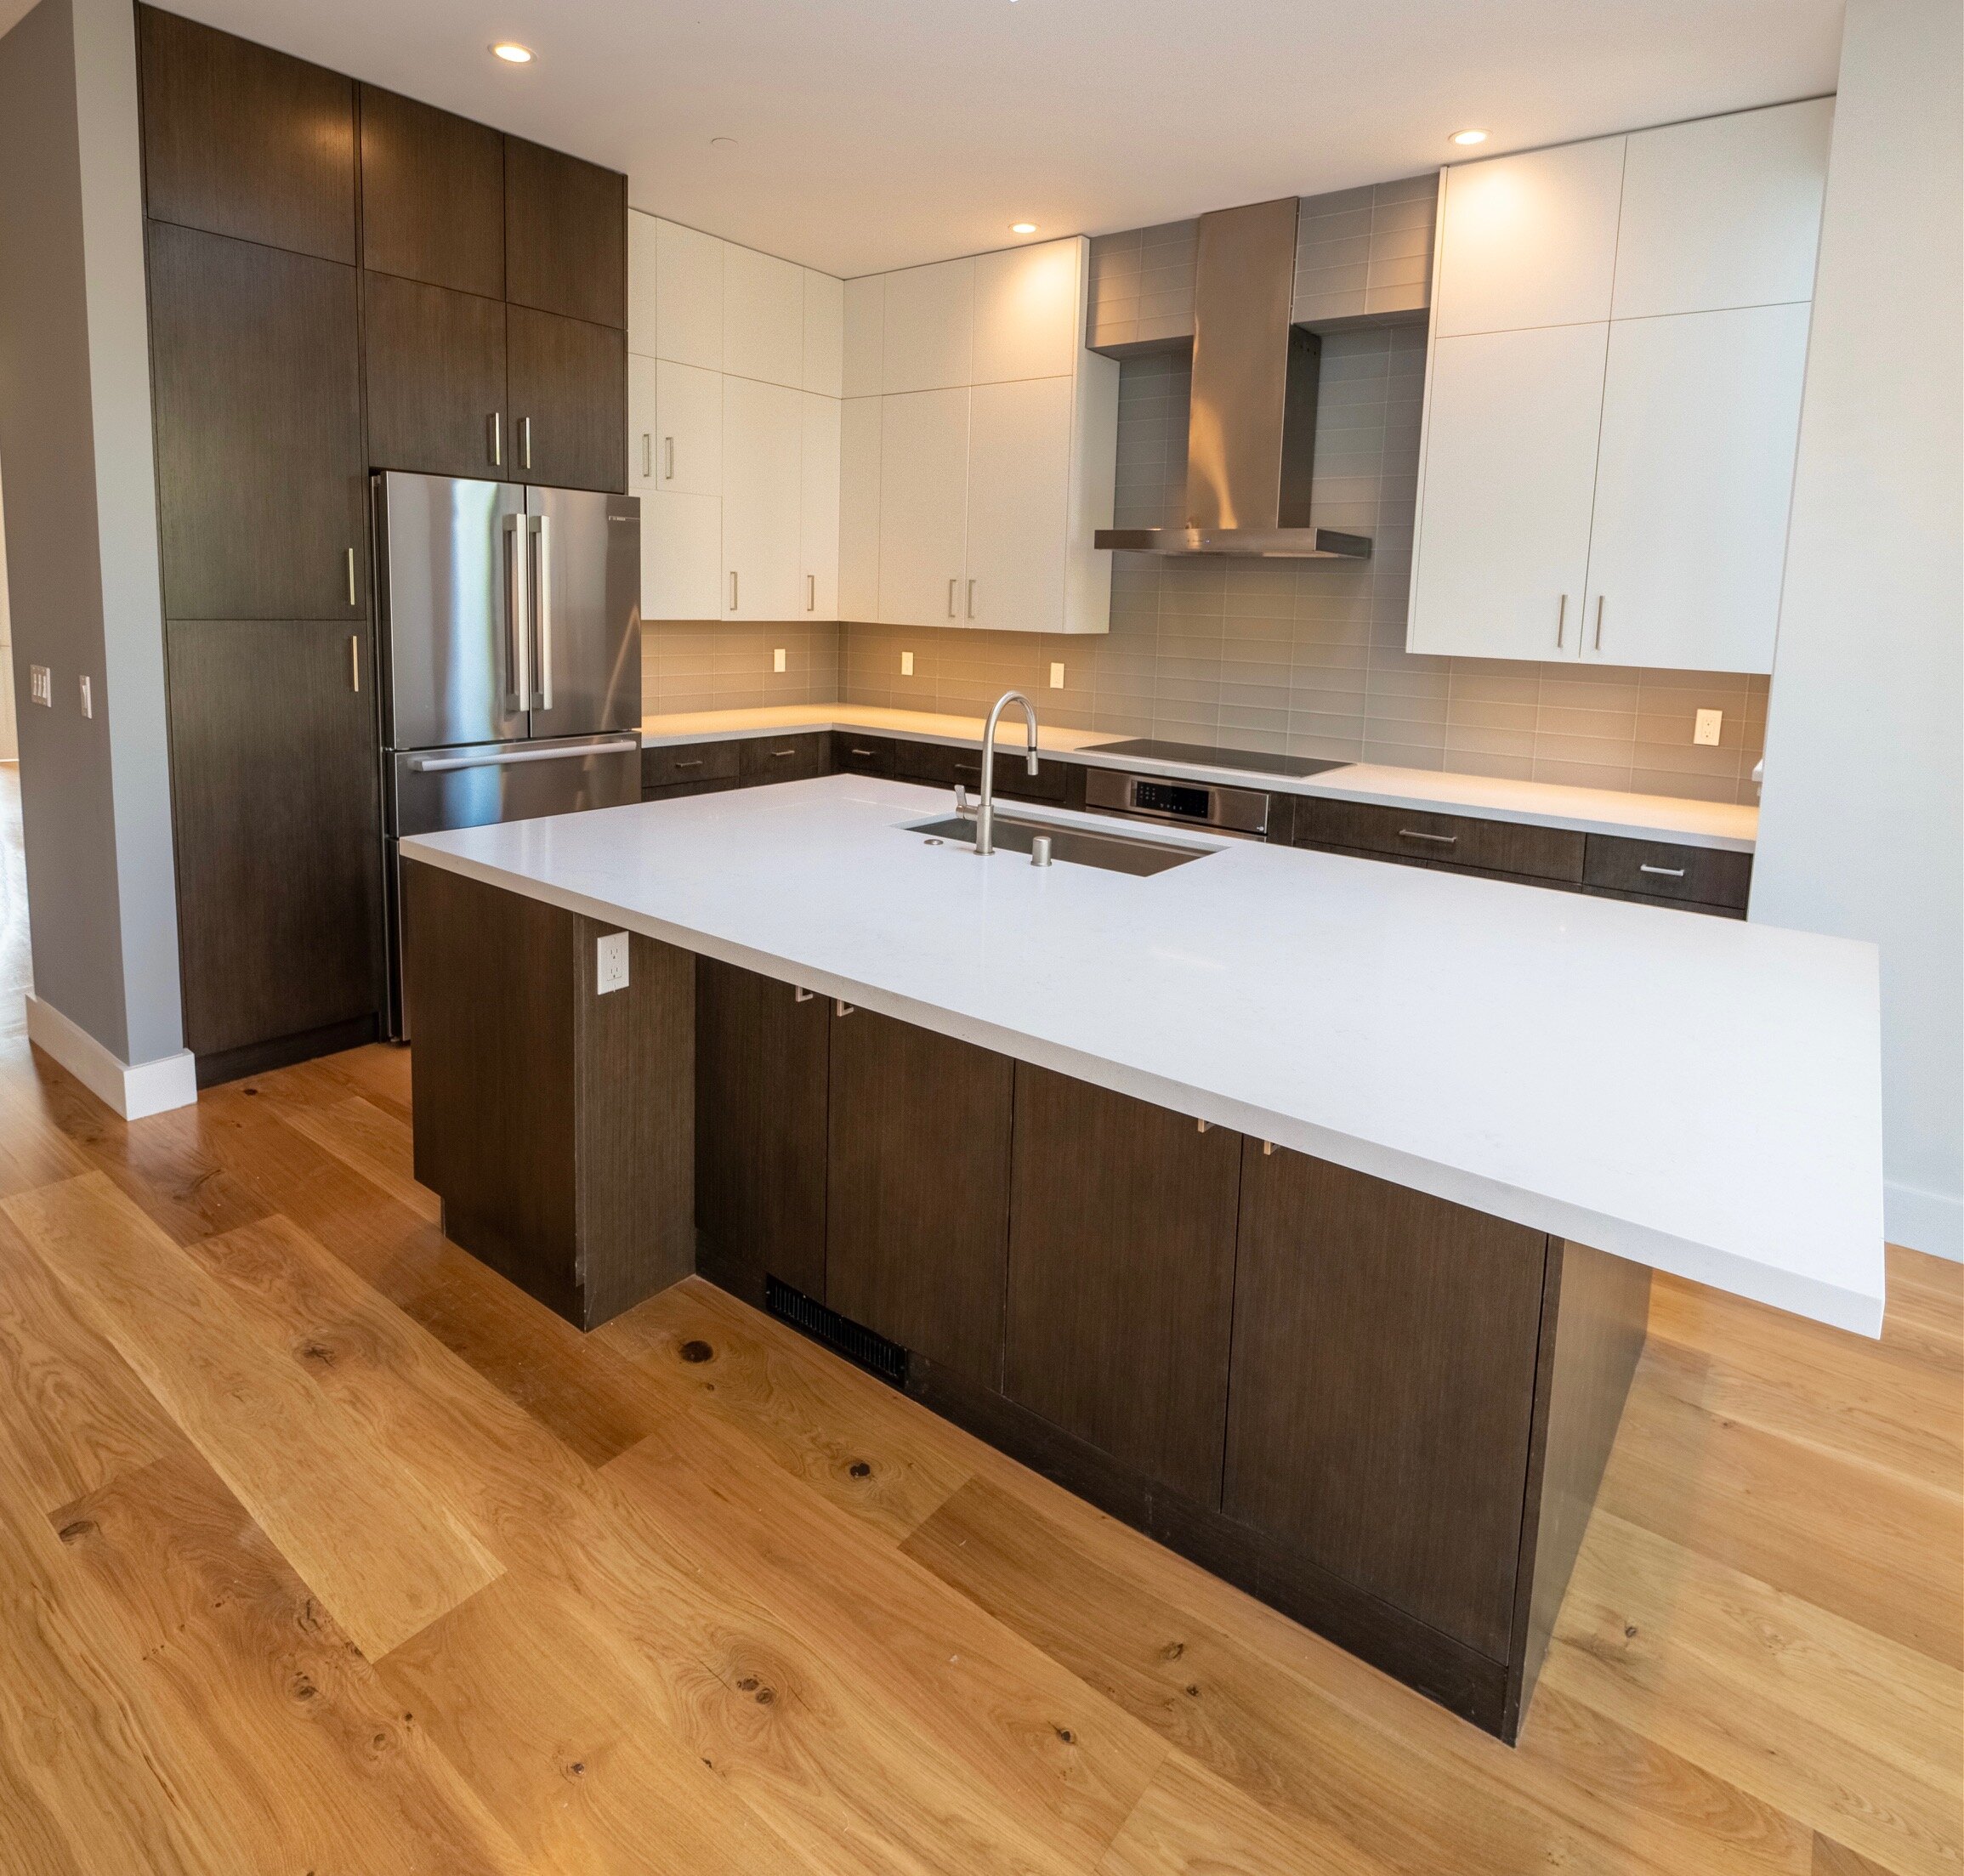 12th ave kitchen completed.jpg